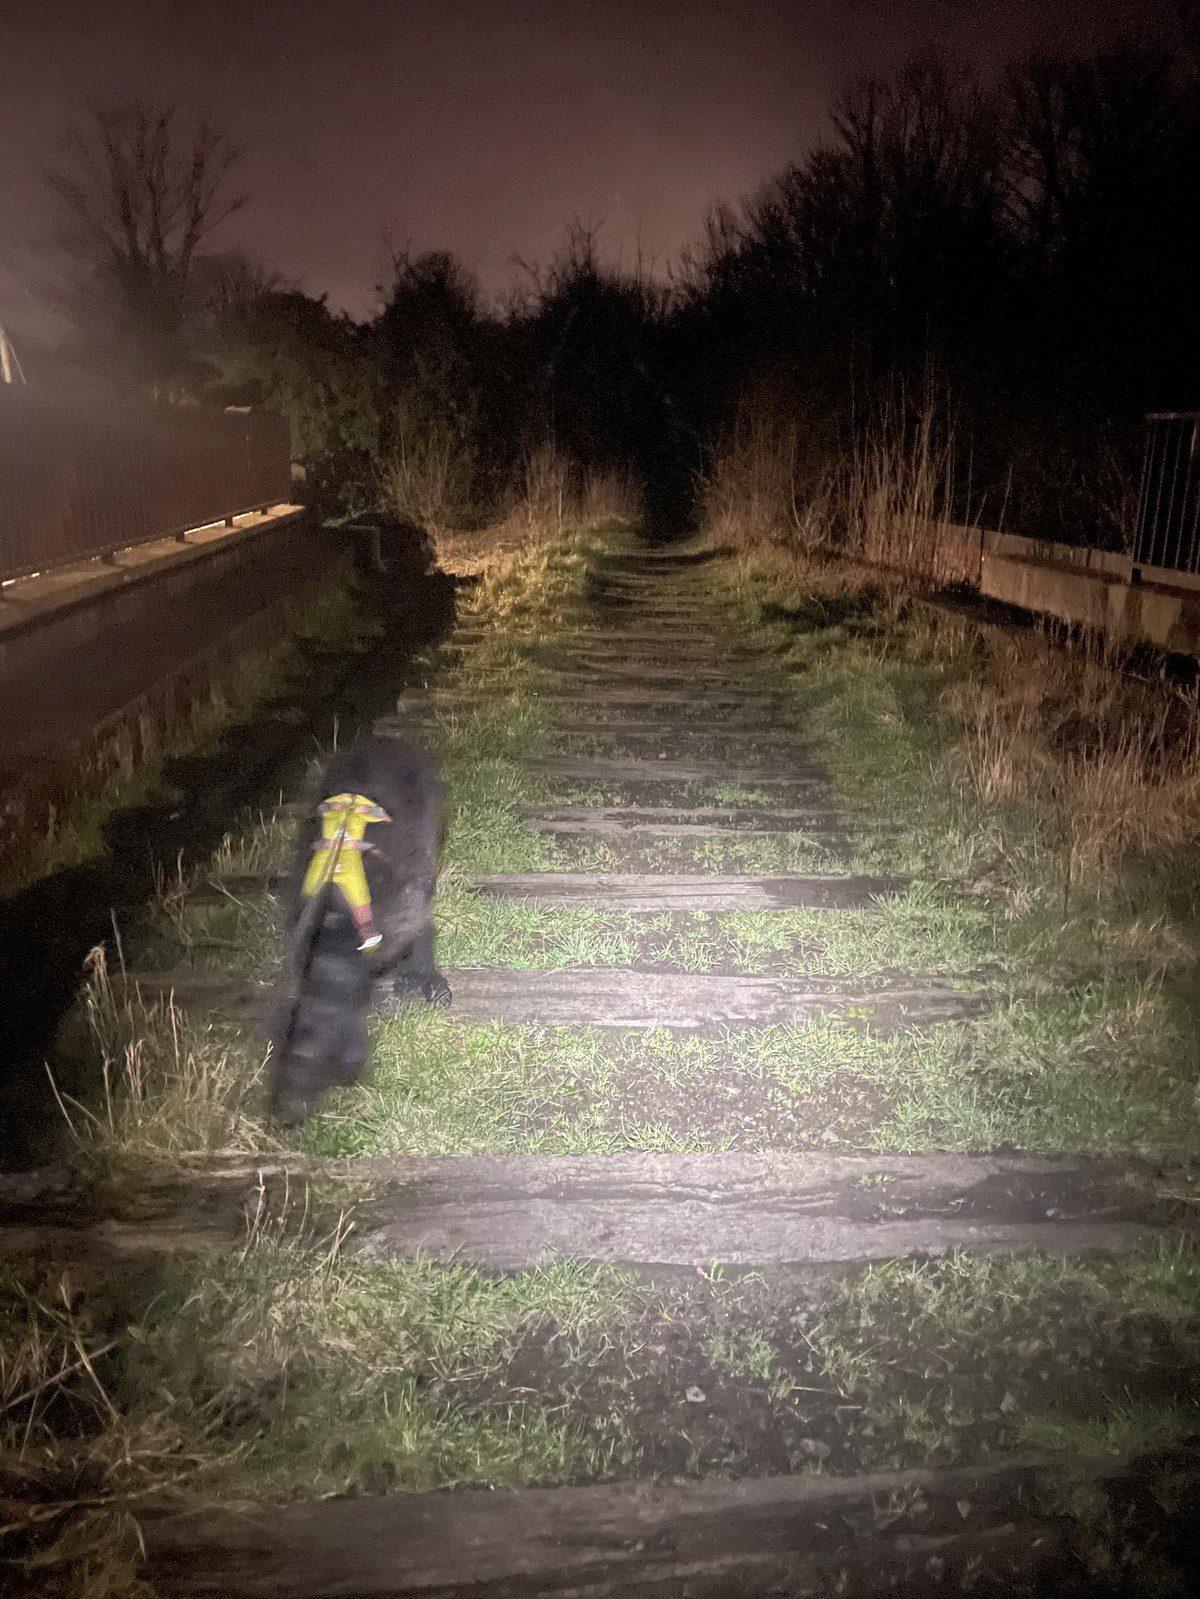 Ghyll, blurry, walking across old railway ties, with grass and mud in between and hedges growing on the verges of the old tracks, no rails to be seen.